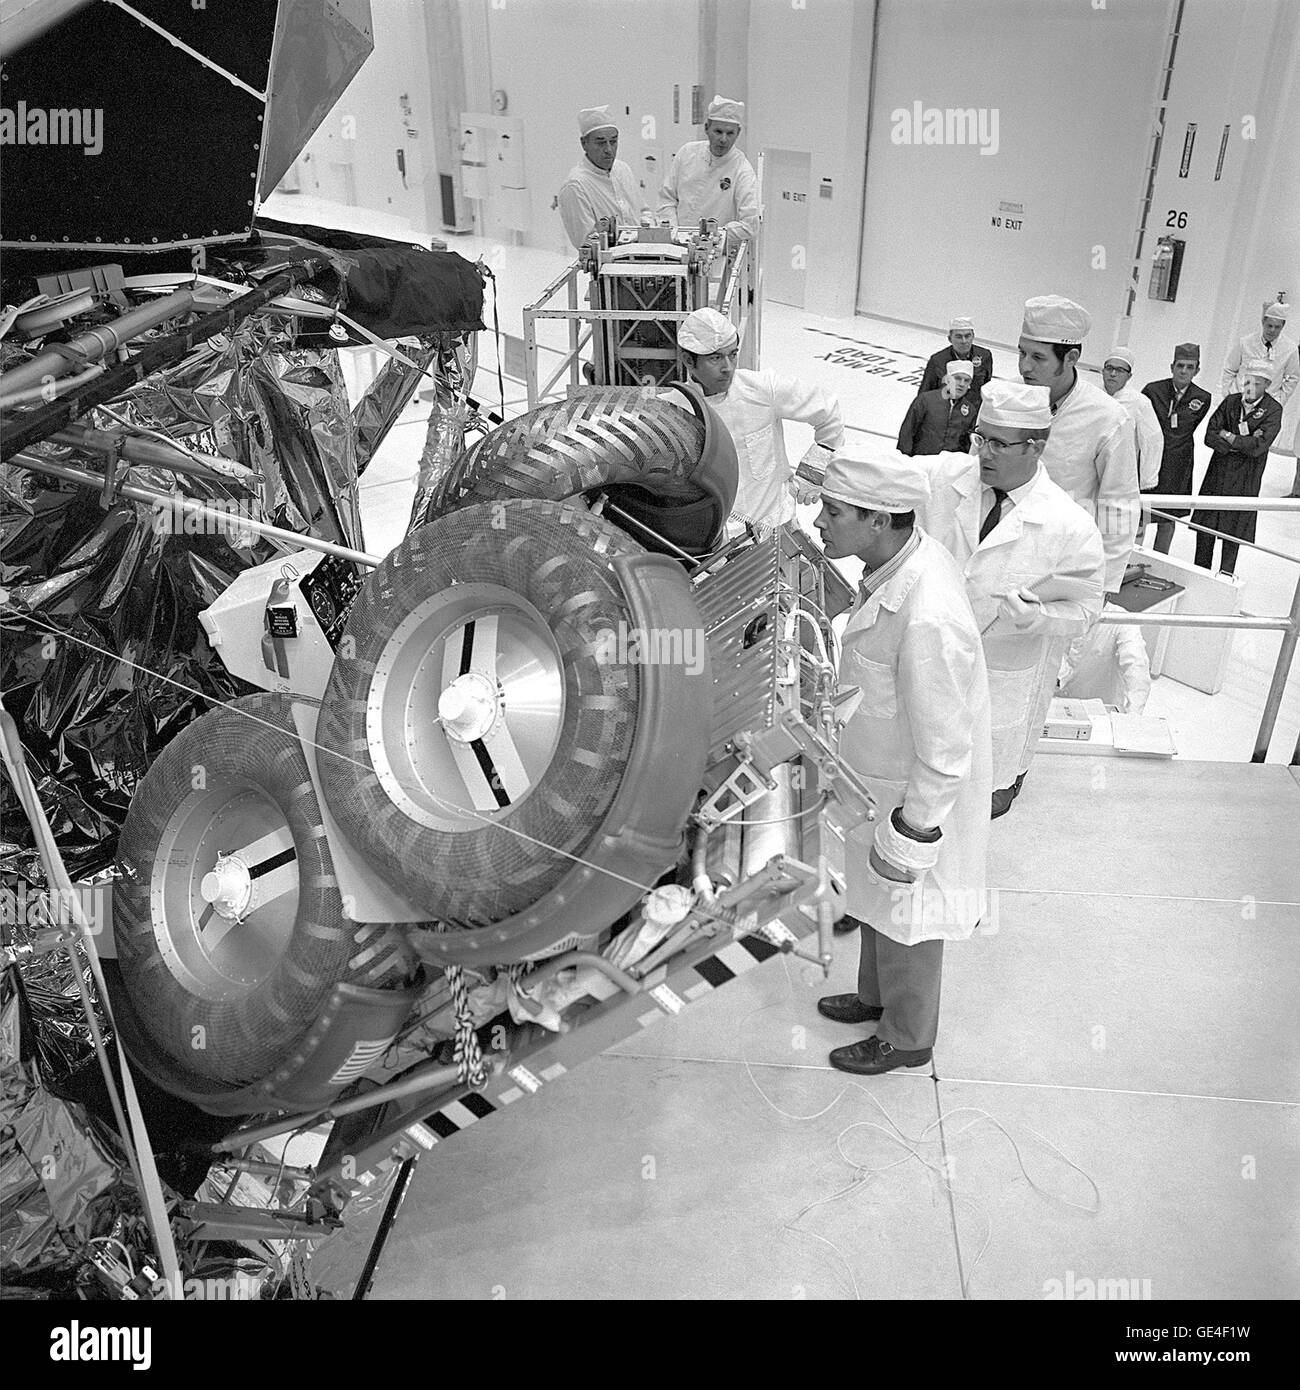 (November 12, 1971) Apollo 16 Commander, John Young, center; and Lunar Module Pilot Charles Duke, foreground, inspect the Lunar Roving Vehicle they will use for transportation on the Moon during a Deployment Test in the Manned Spacecraft Operations Building at the Kennedy Space Center. The Rover is stored in the Ascent Stage of the Lunar Module for the trip to the Lunar surface. This inspection came during a review of Apollo Lunar Surface Experiments at the Spaceport. Launch is set for March 17. Stock Photo